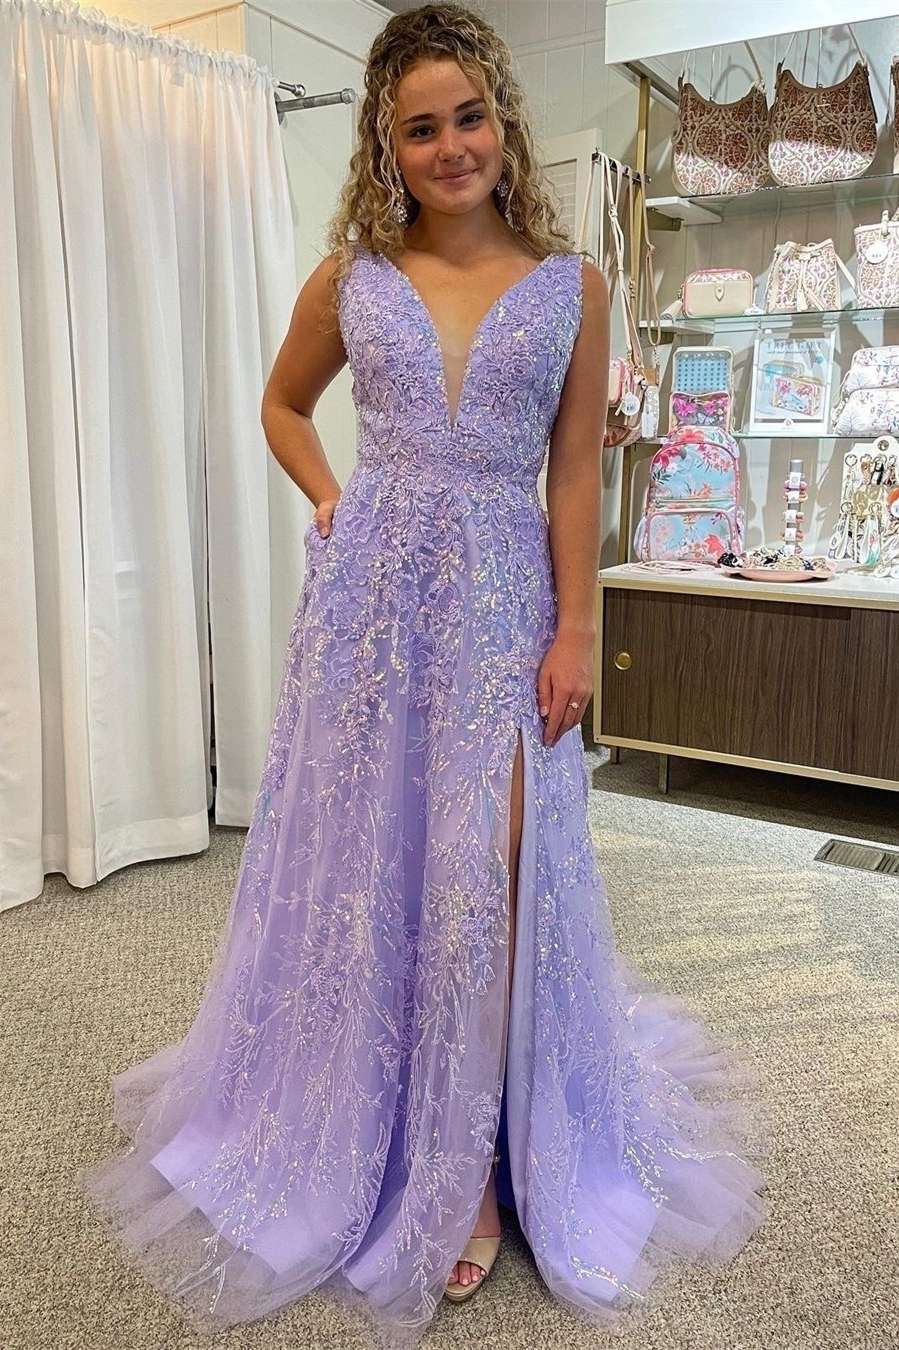 Sparkly Lilac Prom Dresses, Plung Neck Formal Sequins Evening Gown